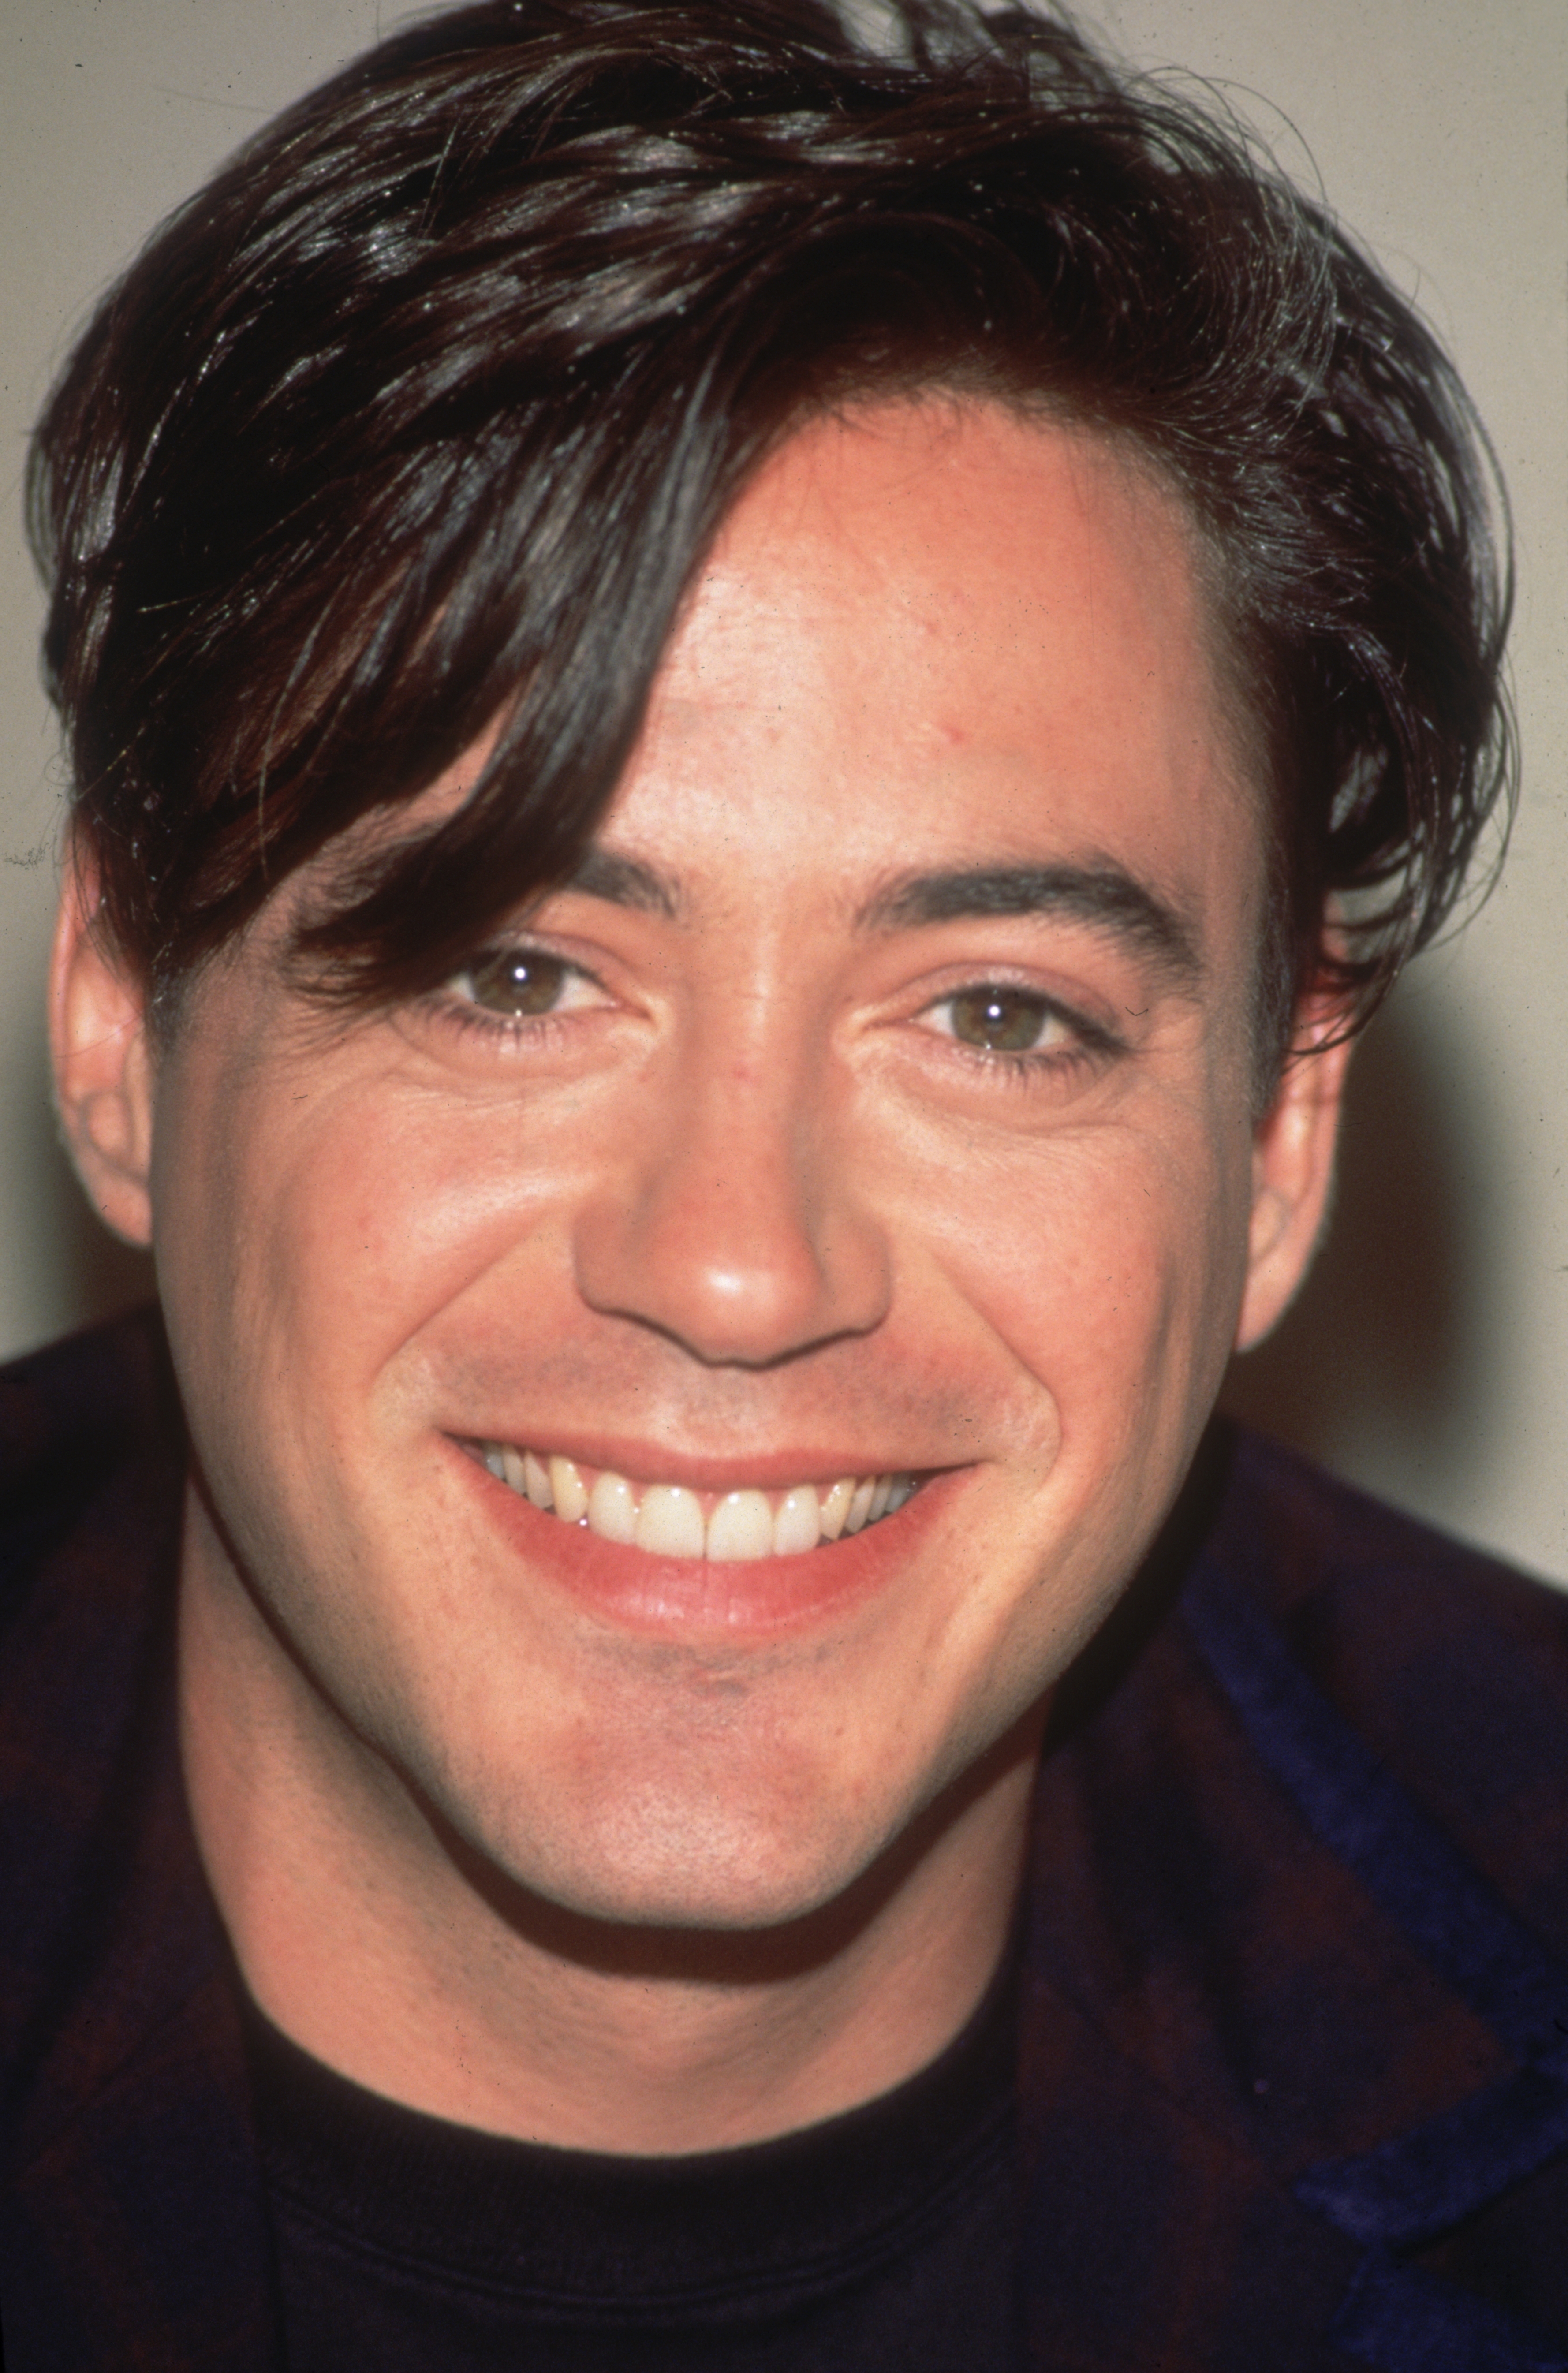 Robert Downey Jr photographed in 1996 | Source: Getty Images